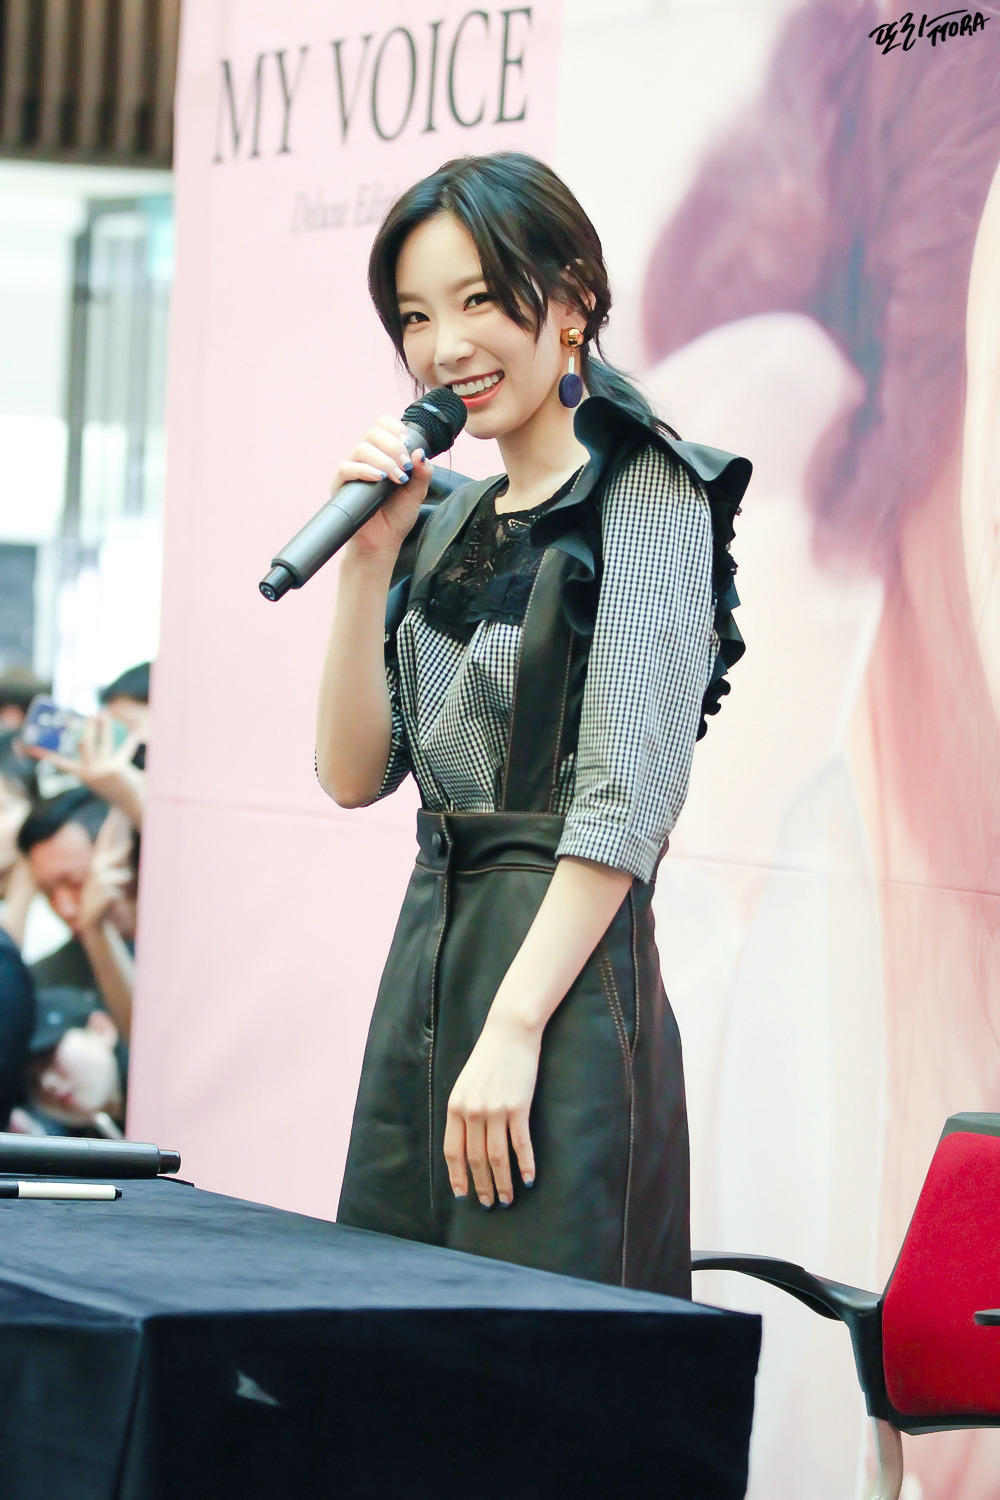 [PIC][16-04-2017]TaeYeon tham dự buổi Fansign cho “MY VOICE DELUXE EDITION” tại AK PLAZA vào chiều nay  - Page 5 2520D7385903686616F1BB